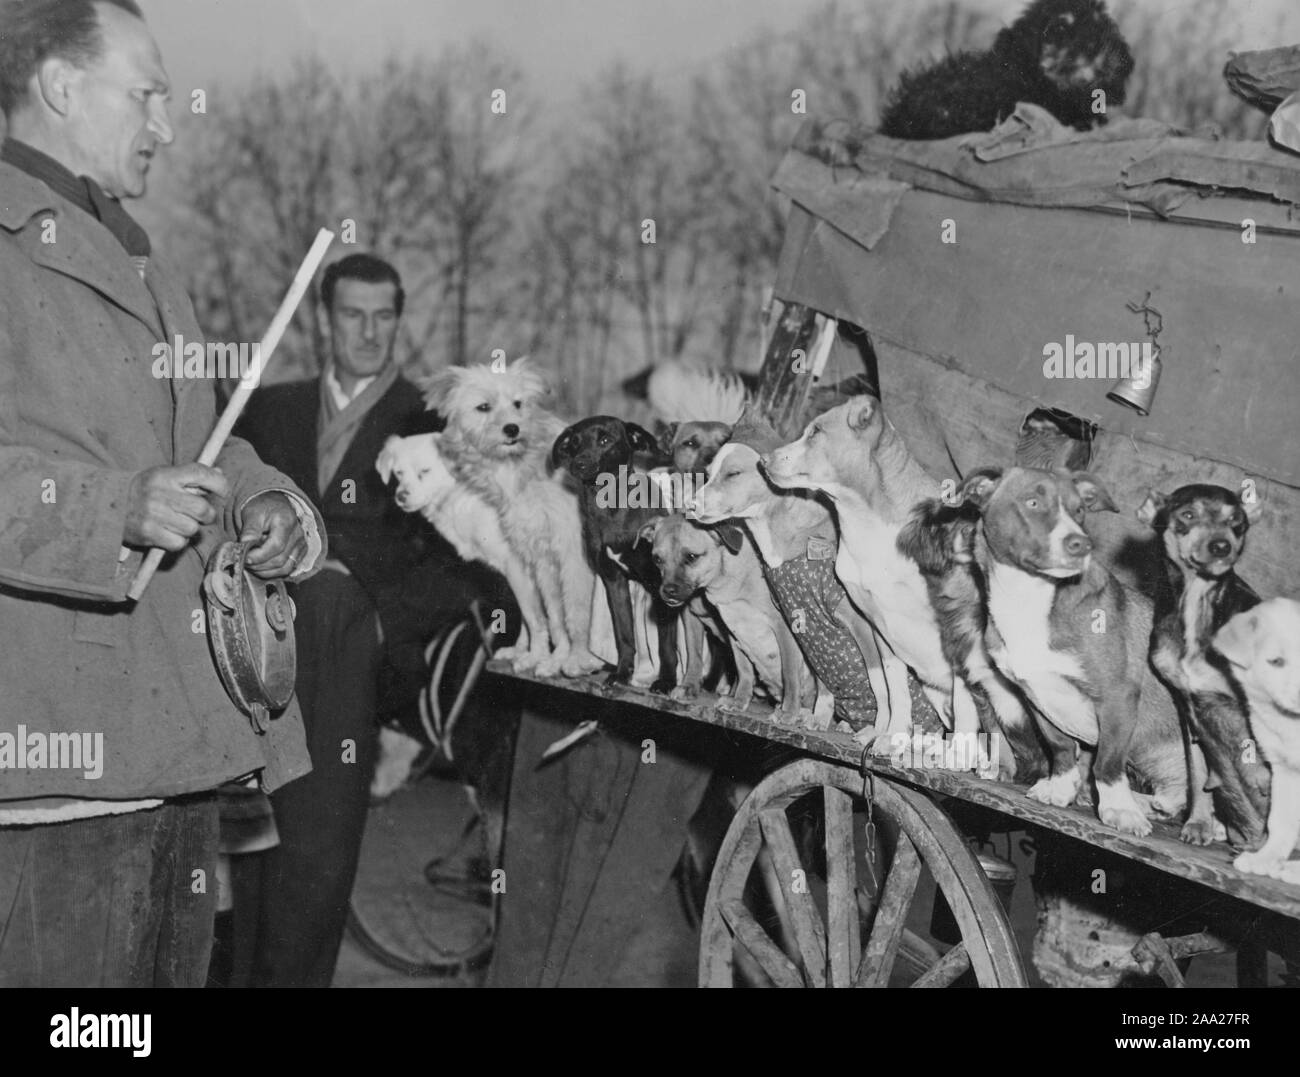 Dog trainer with his dogs. The italian Rodolfo was famous dog trainer and is pictured here with his twelve dogs sitting on a row. Rodolfo was previously a circus owner but at this time 1949 he had only his dogs left. Rome Italy 1949 Stock Photo